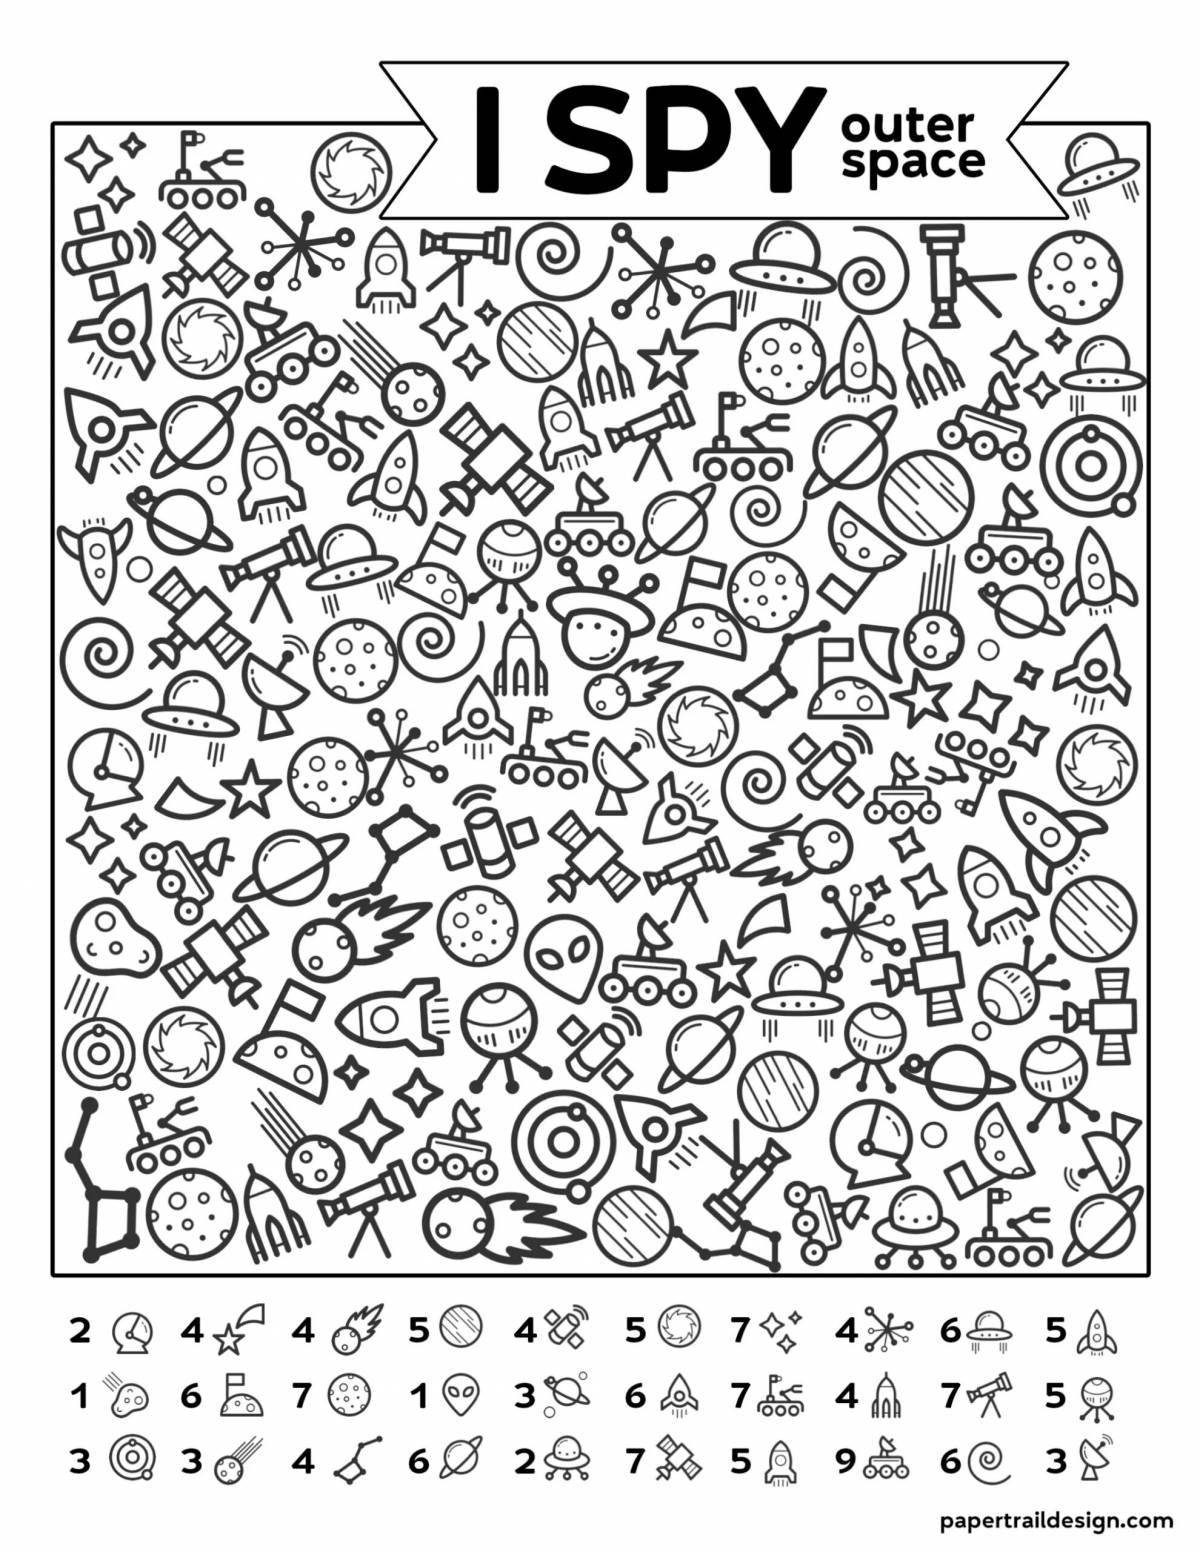 Amazing coloring pages to practice mindfulness